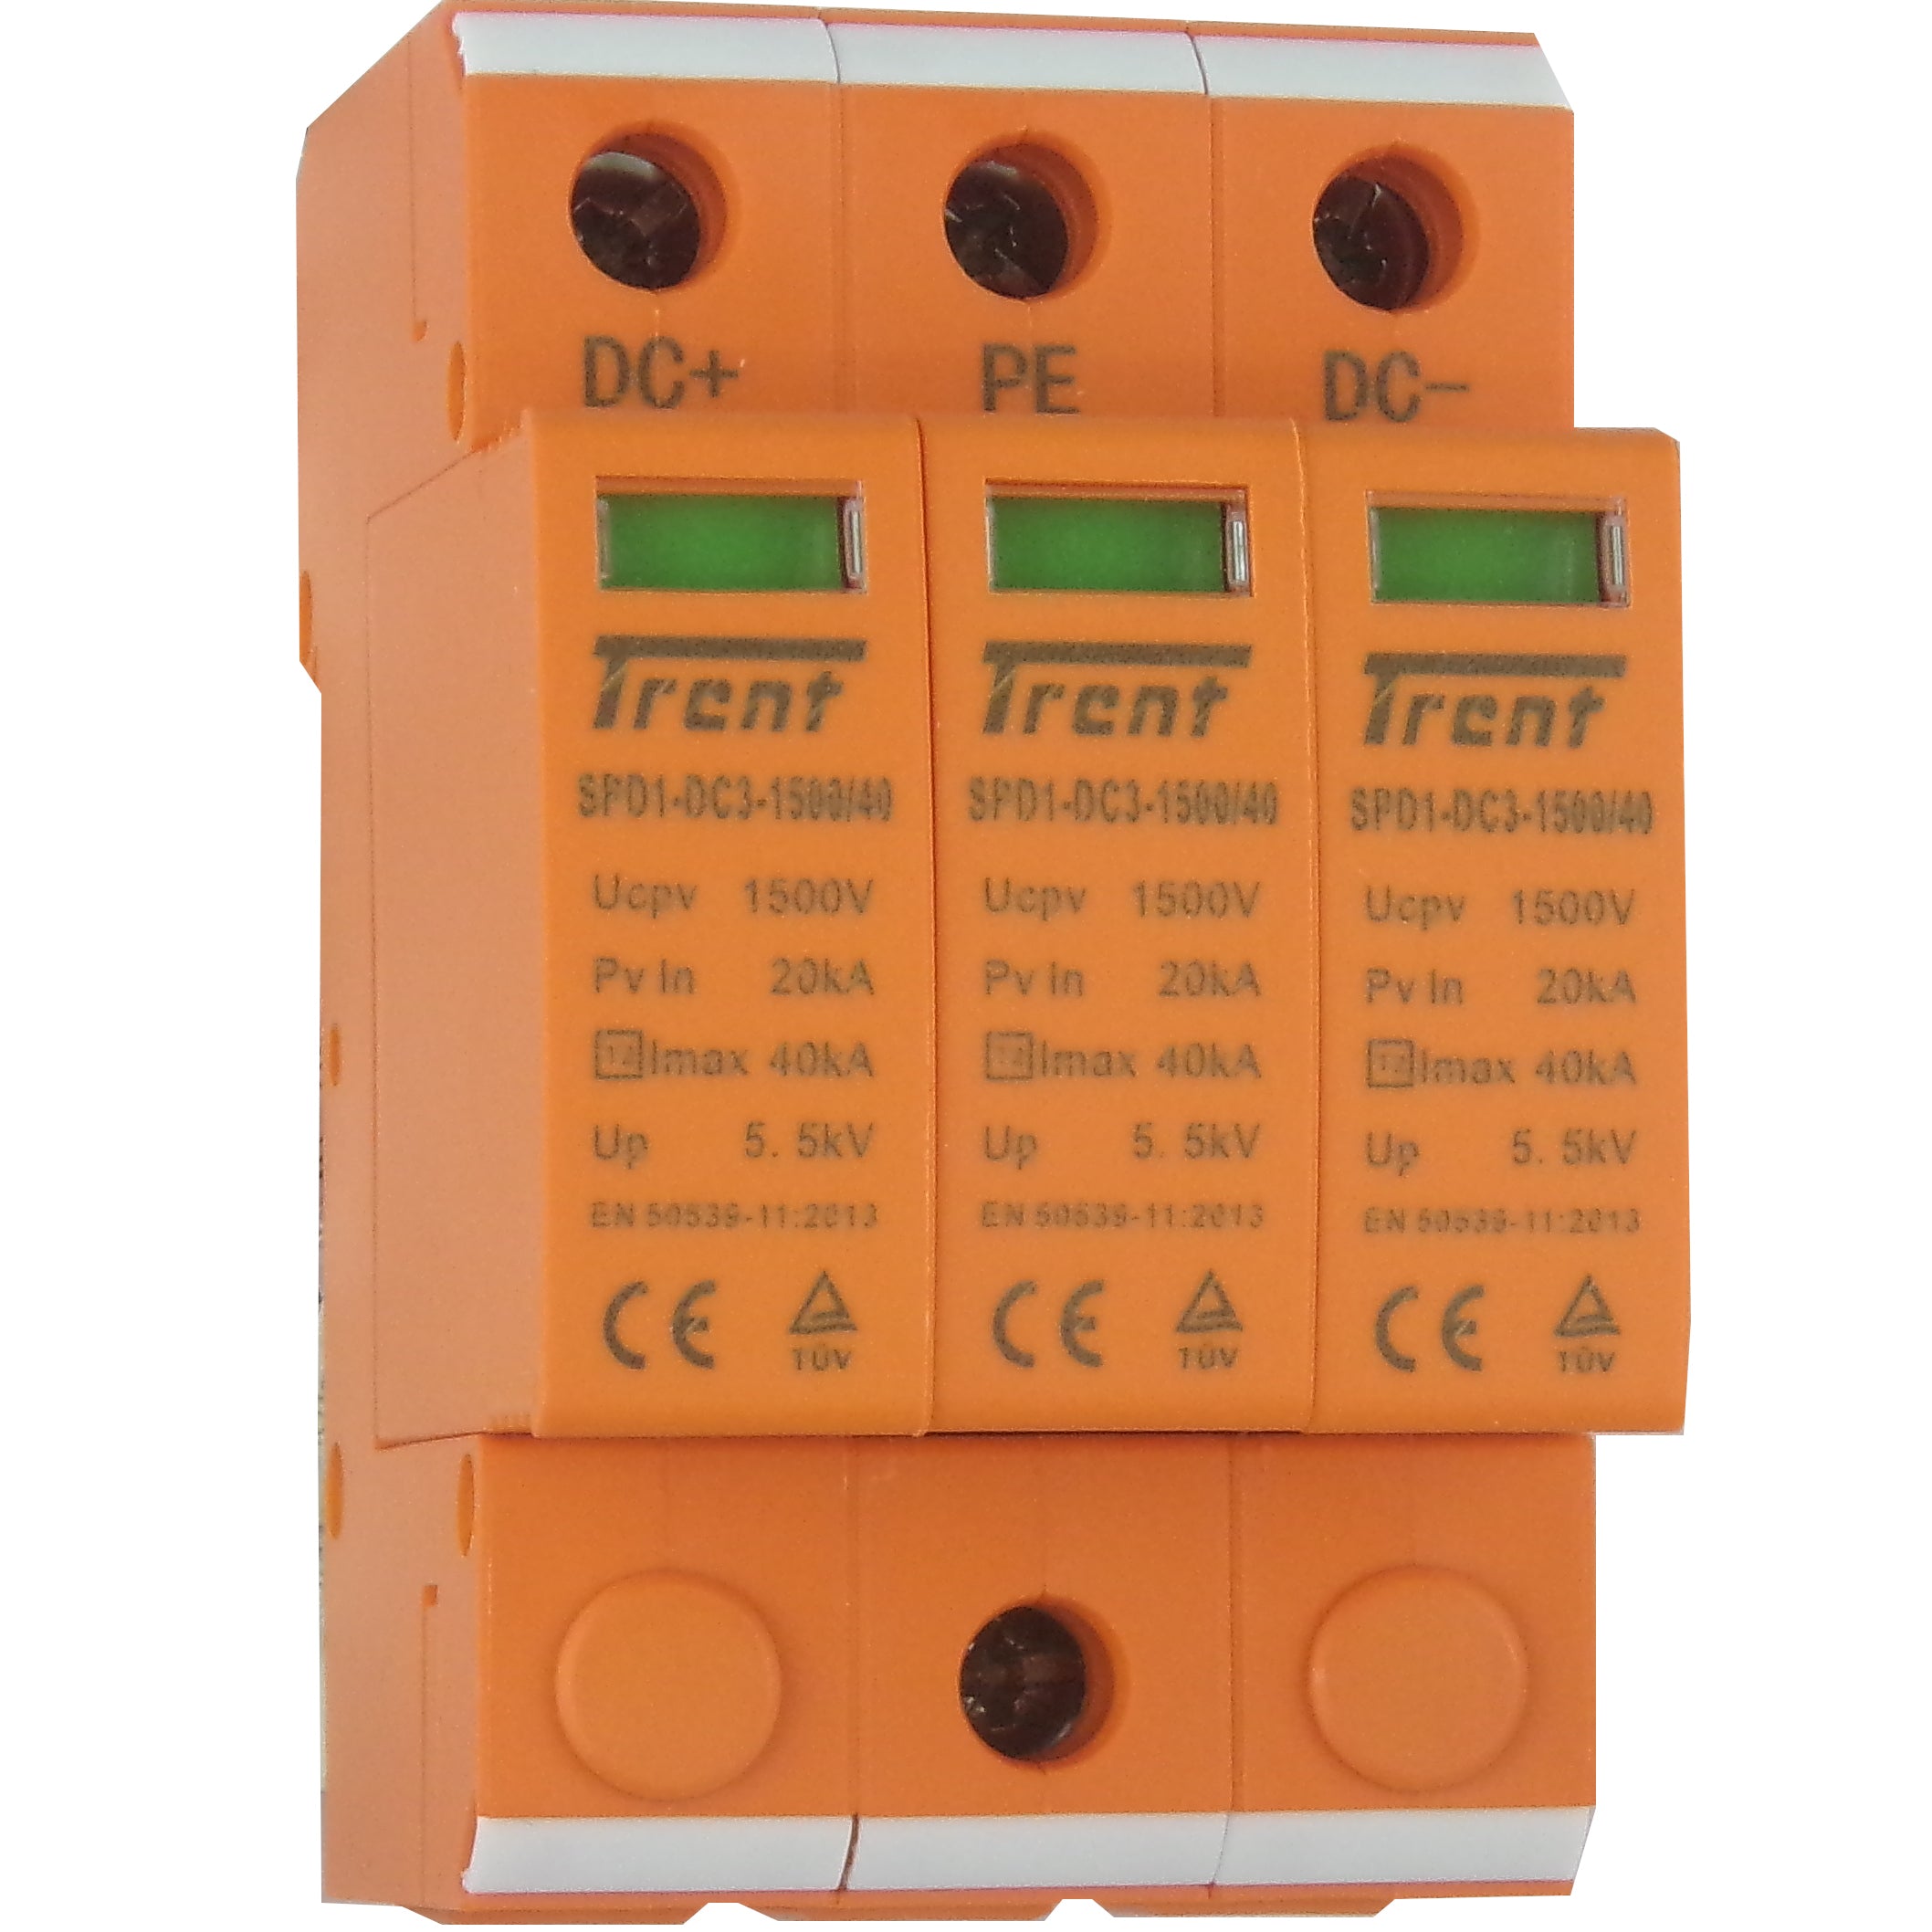 SPD1-DC/3-1500/40, 1500VDC Surge Protection Device for Photovoltaic Systems, Type 2